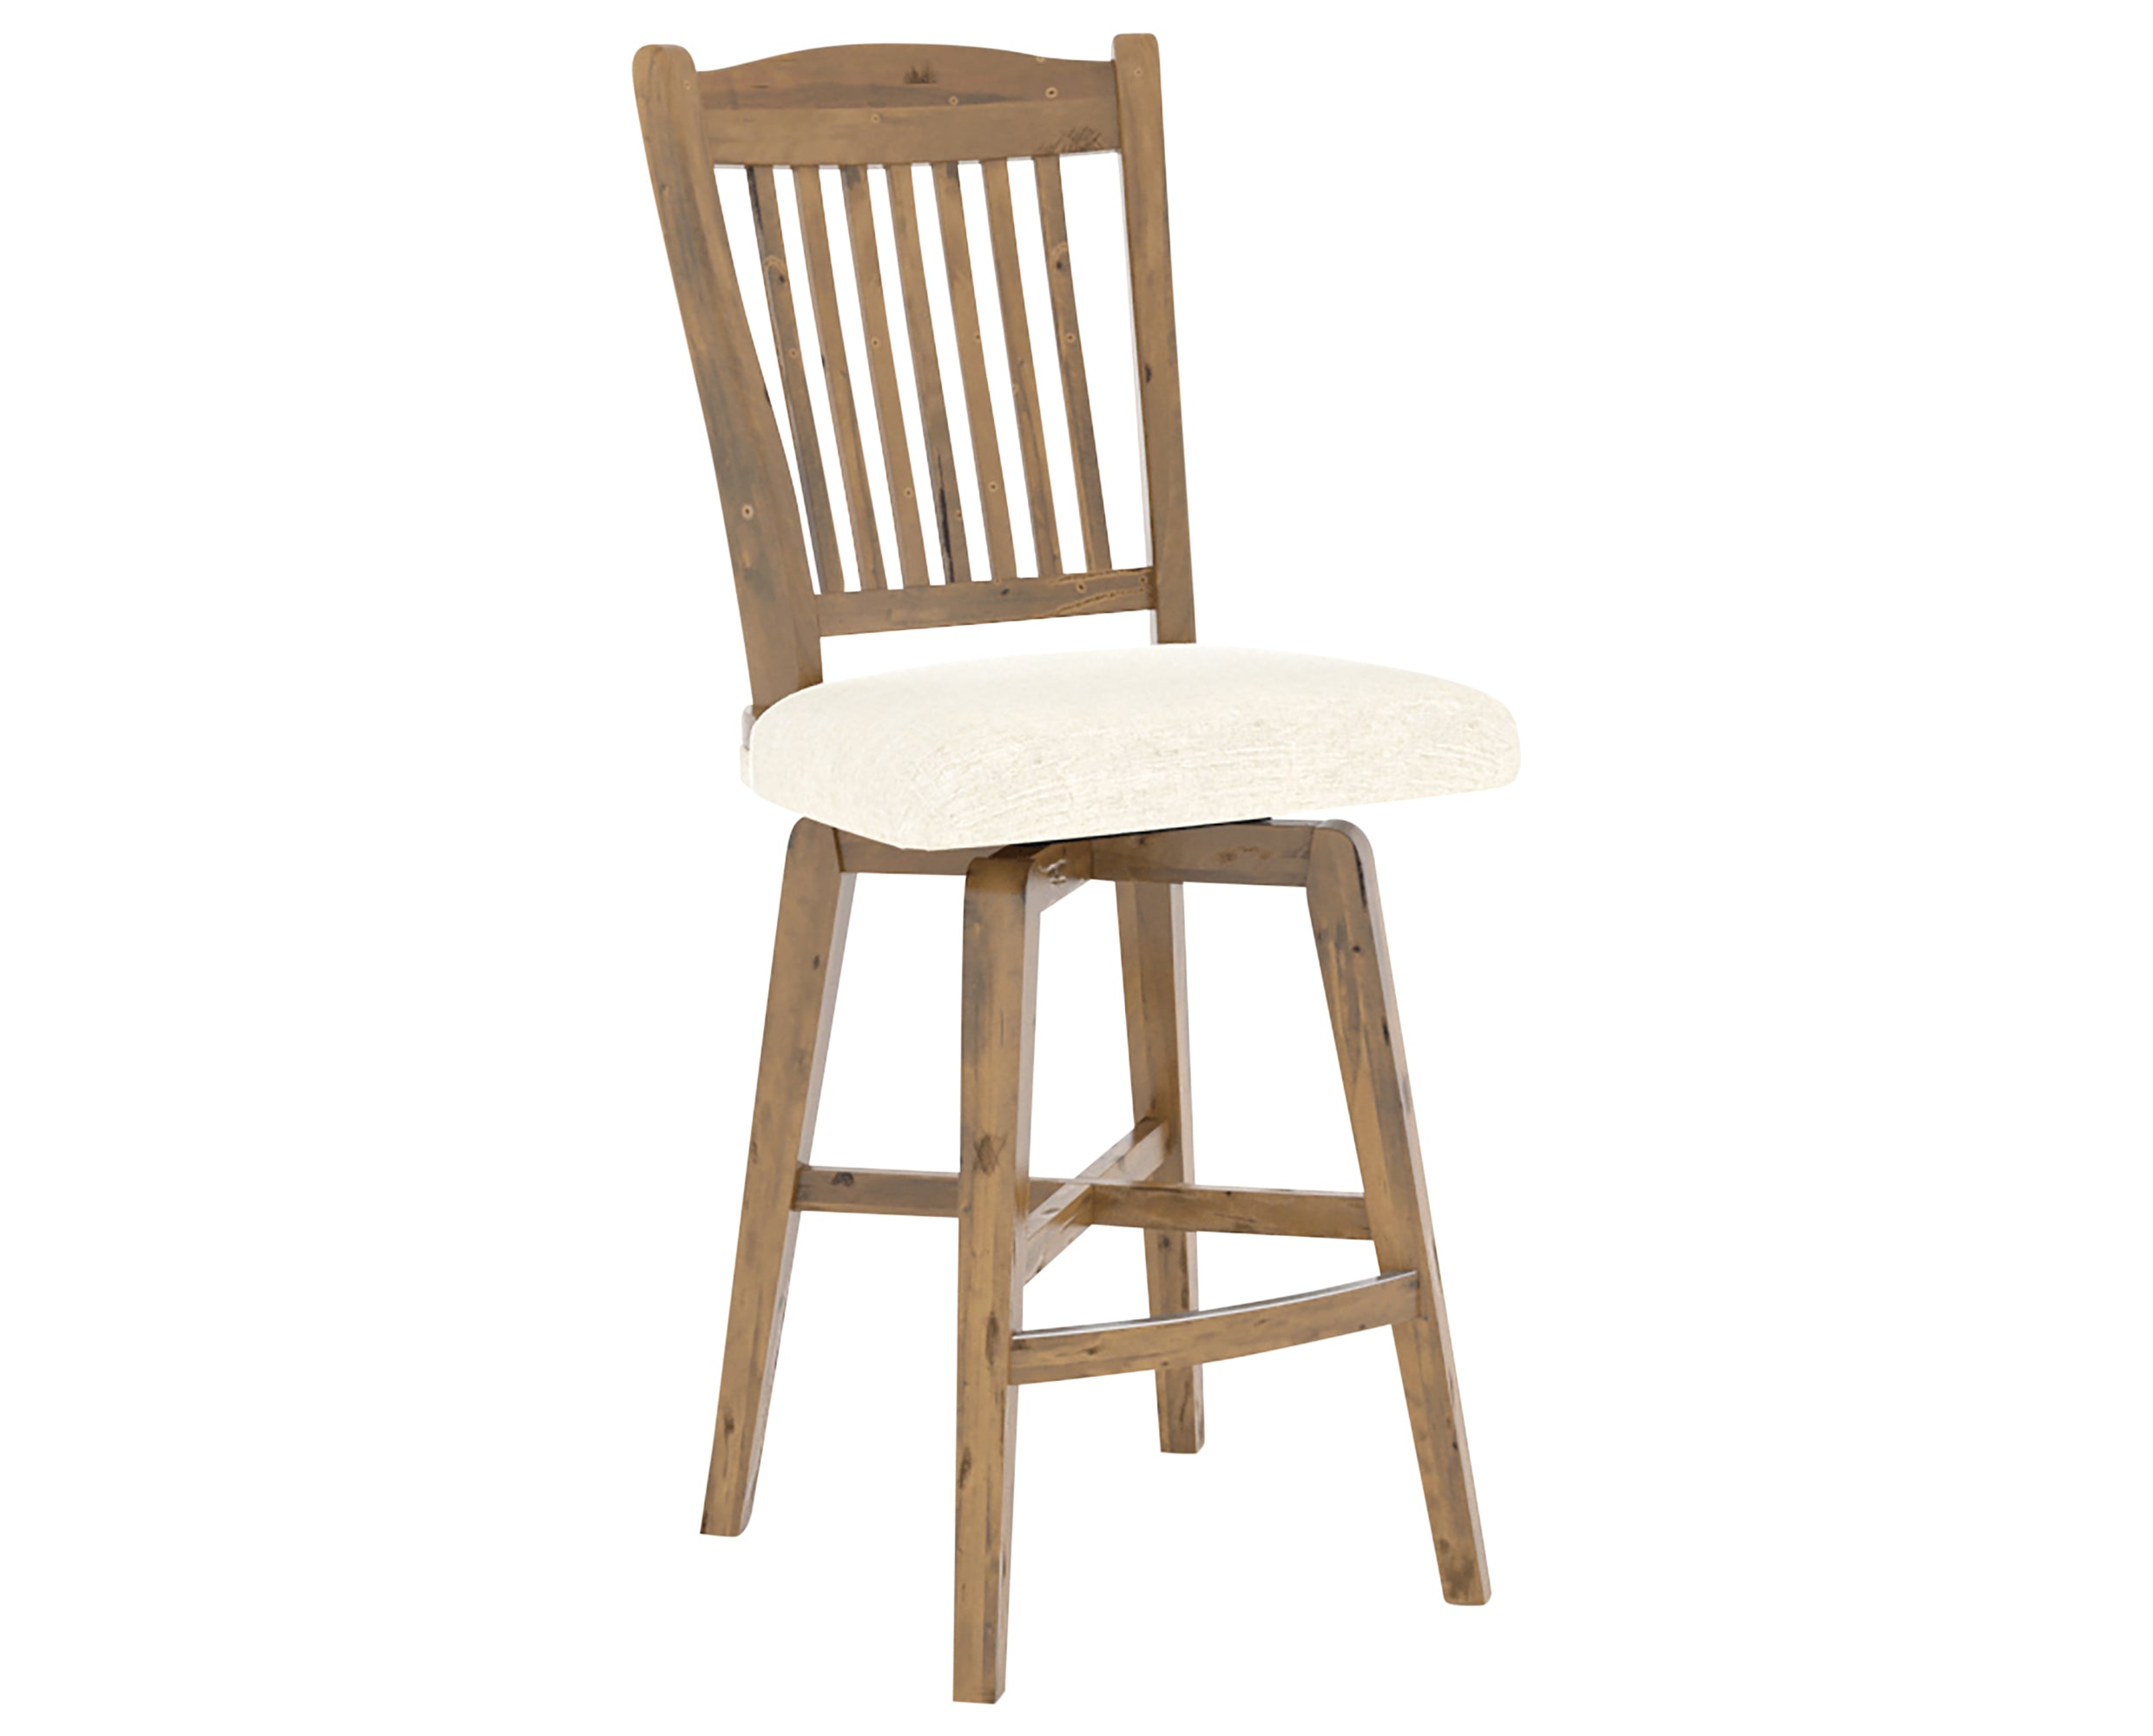 Oak Washed and Fabric TW | Canadel Champlain Counter Stool 7232 | Valley Ridge Furniture